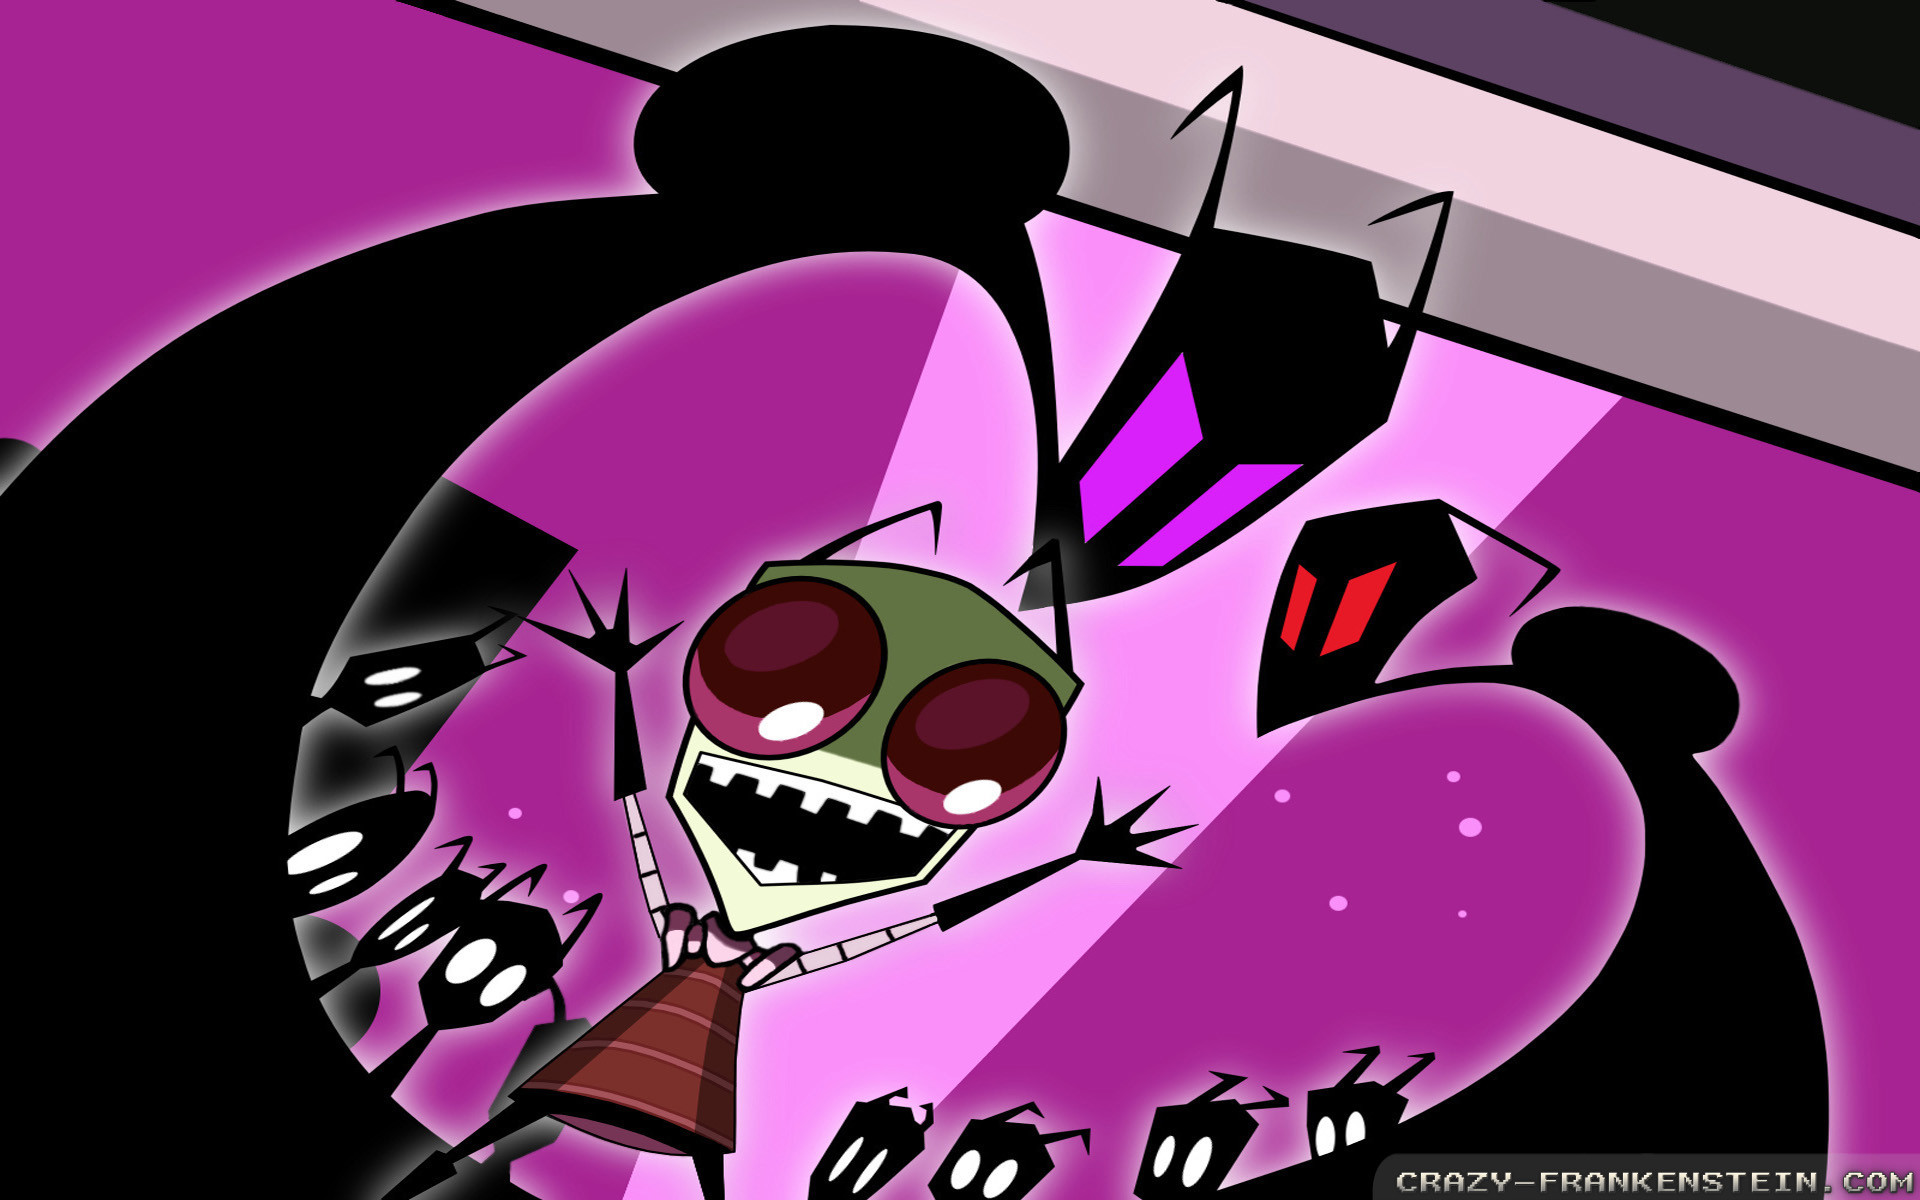 1920x1200 Wallpaper: Invader Zim Scary Resolution: 1024x768 | 1280x1024 | 1600x1200.  Widescreen Res: 1440x900 | 1680x1050 | 